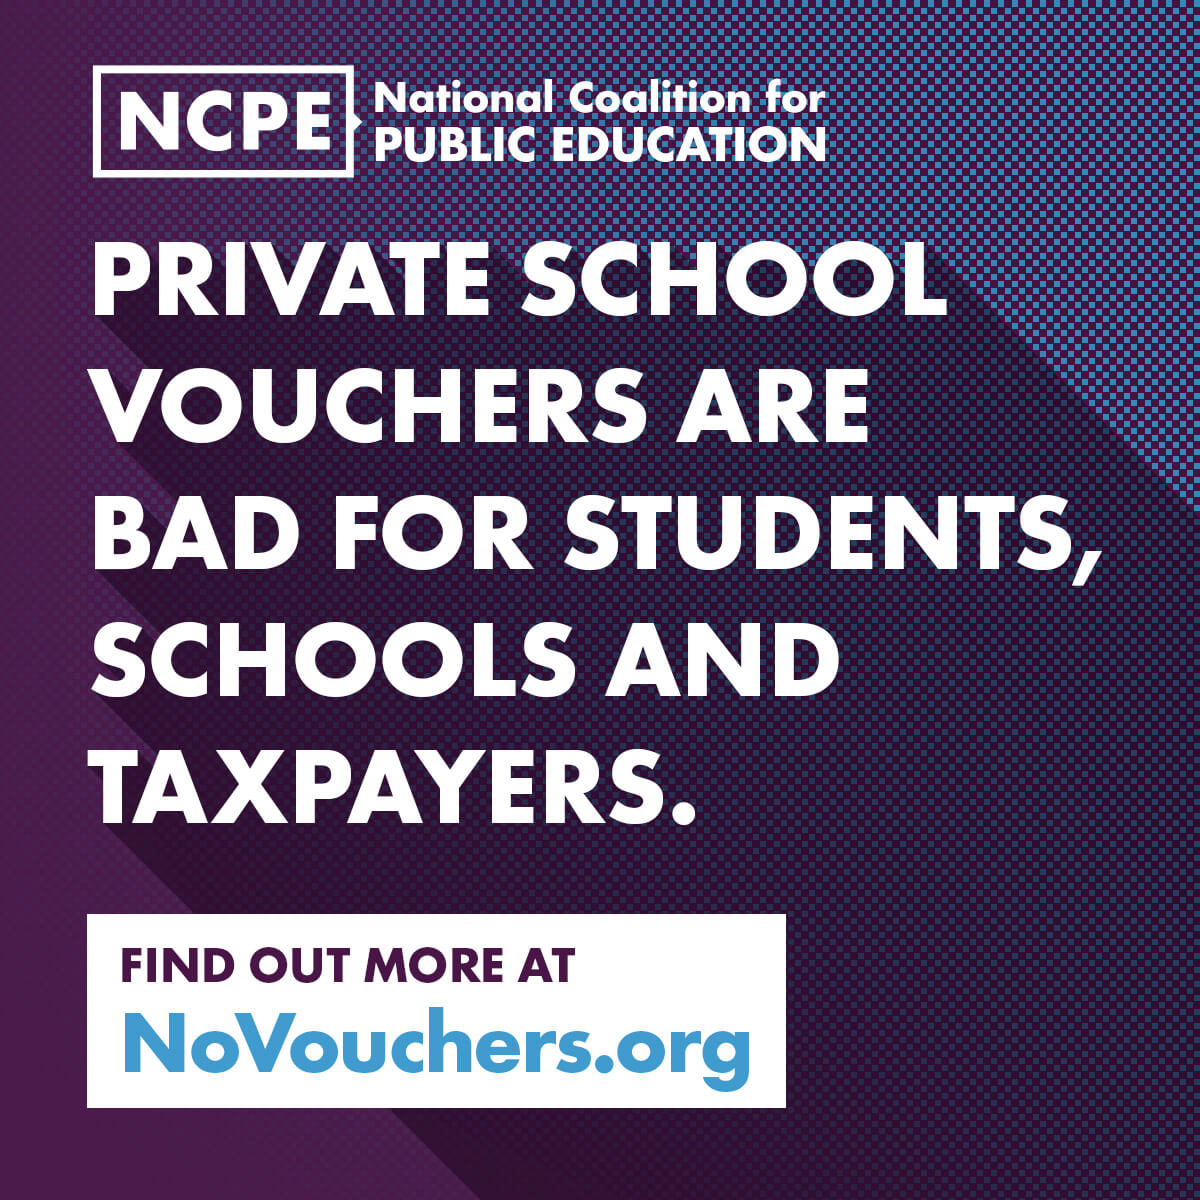 Private school vouchers are bad for students, schools, and tax payers